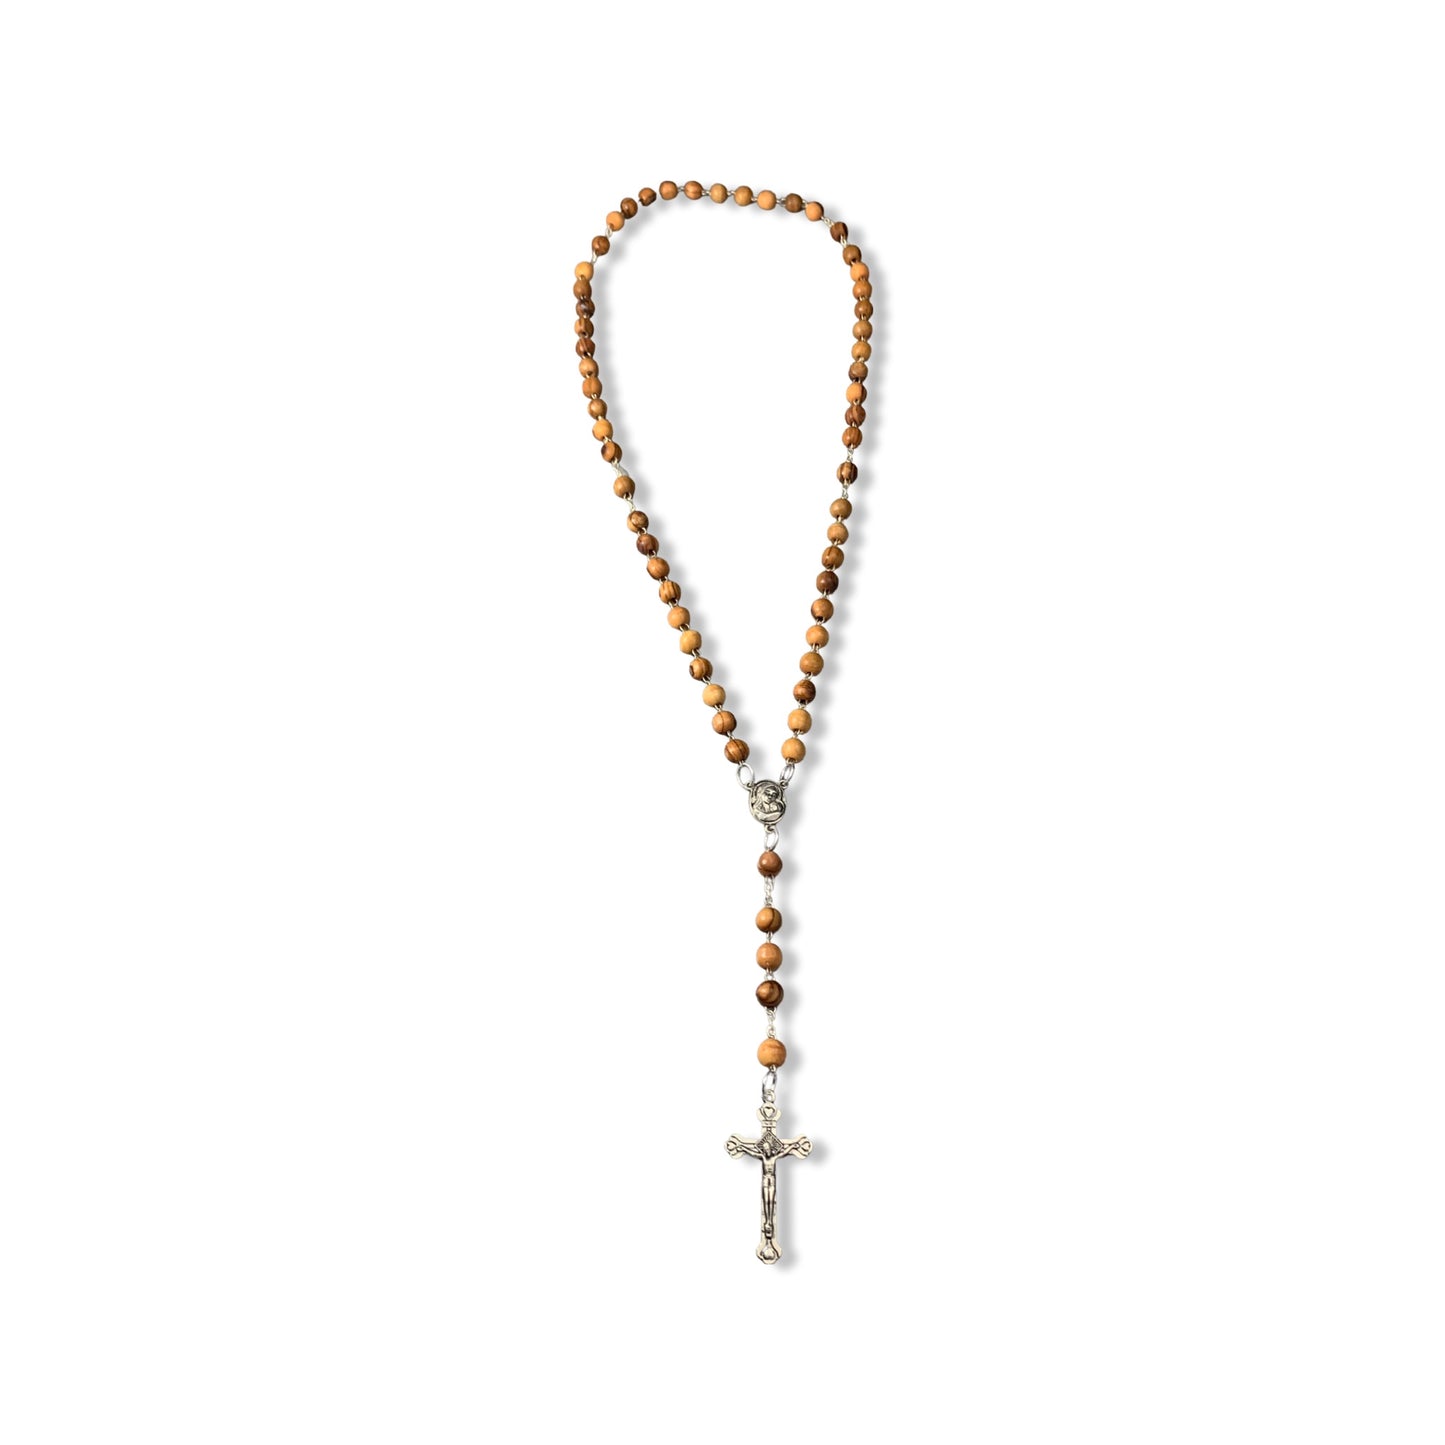 Olive Wood Our Lady of Tenderness Rosary